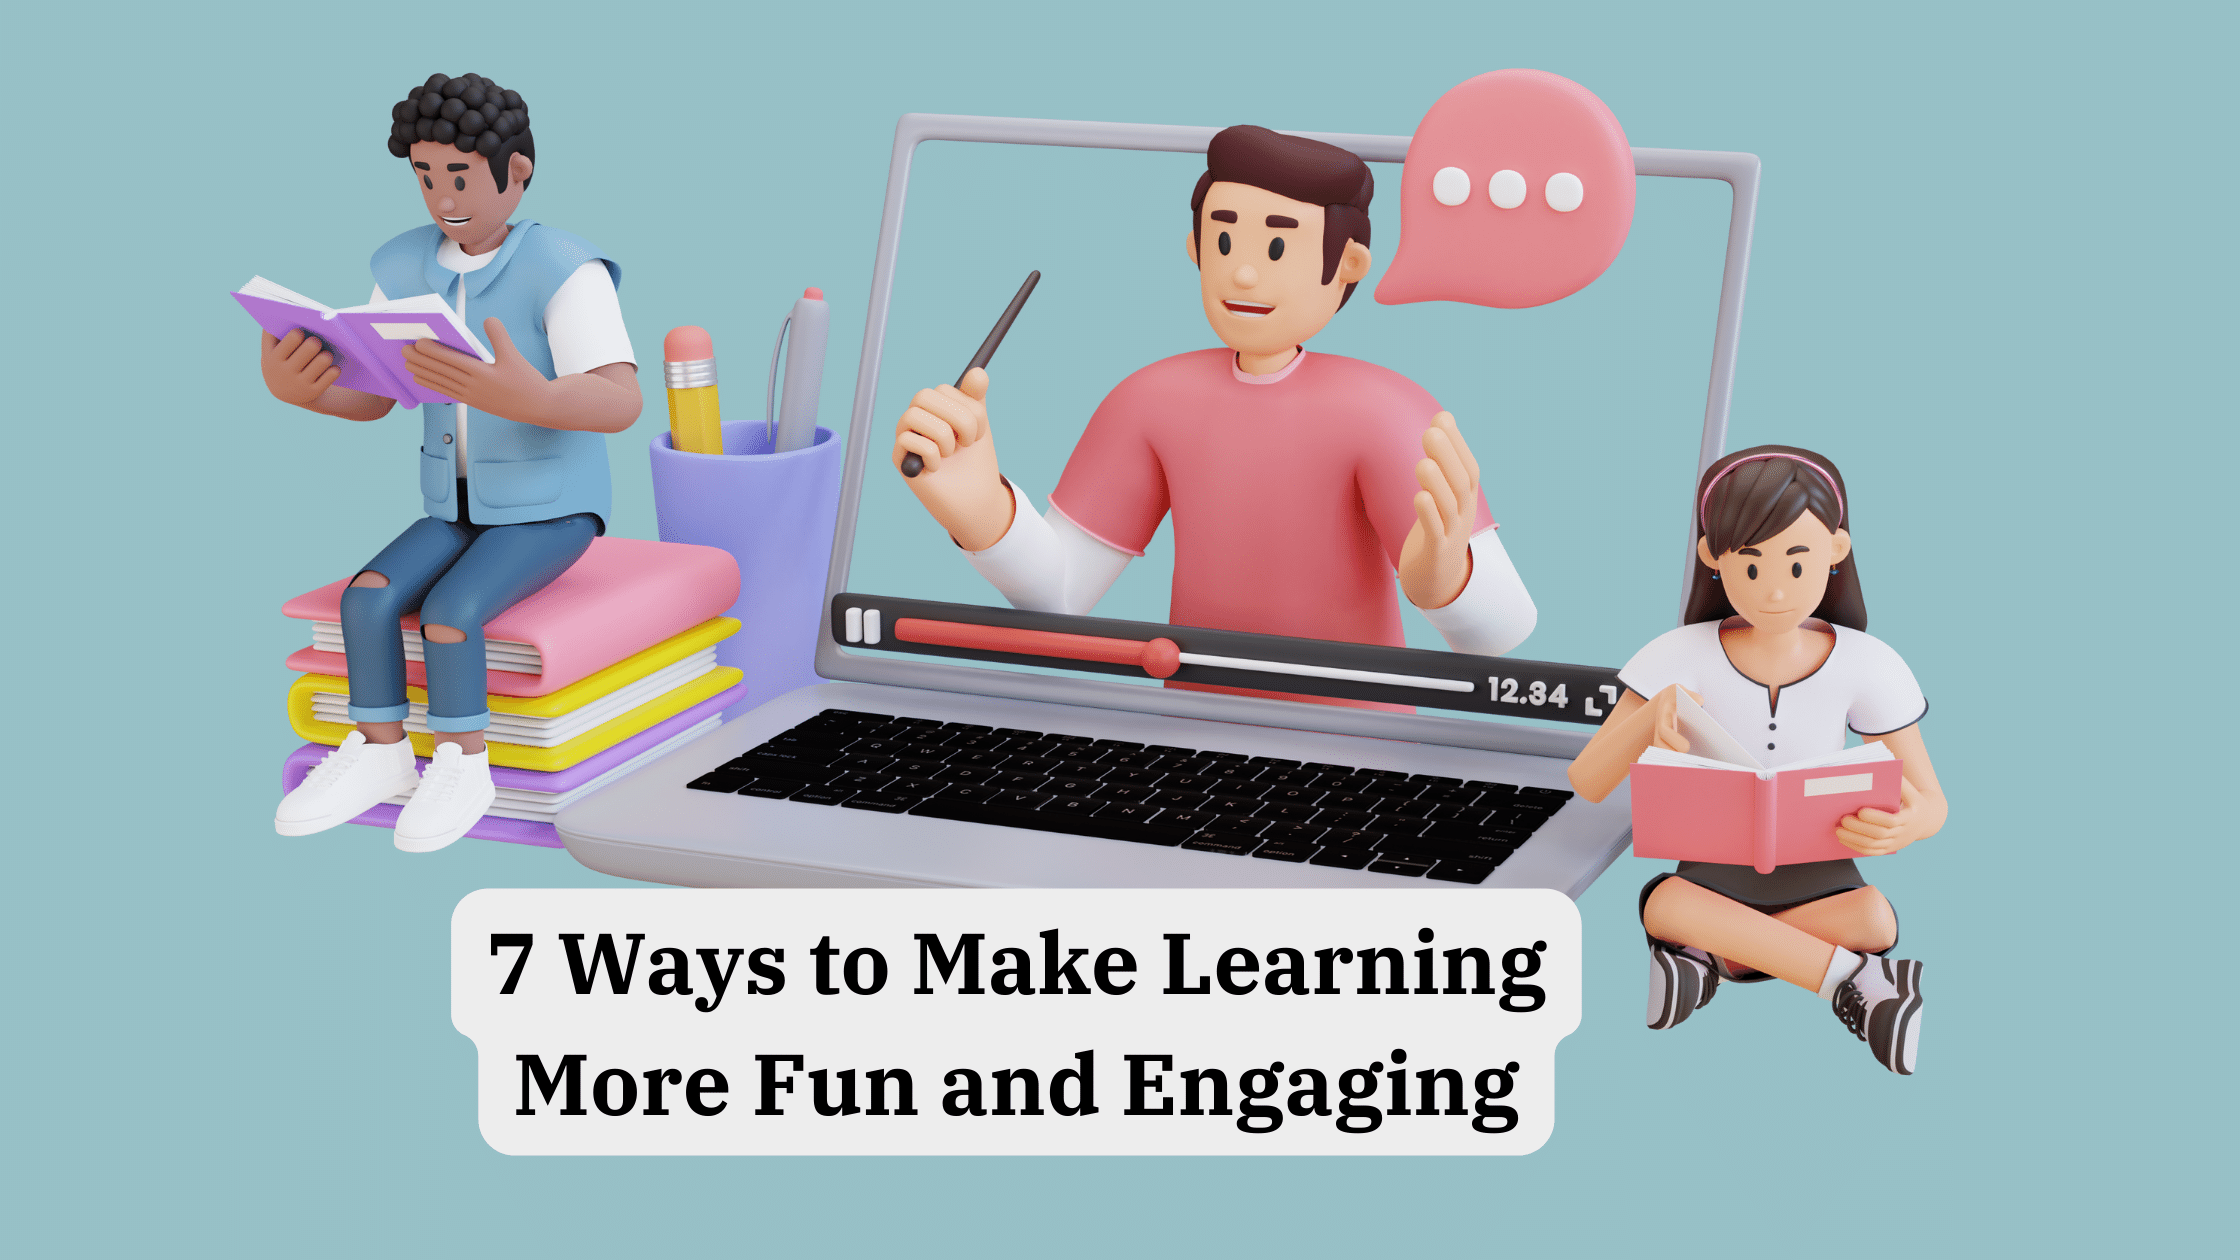 Make Learning More Fun and Engaging